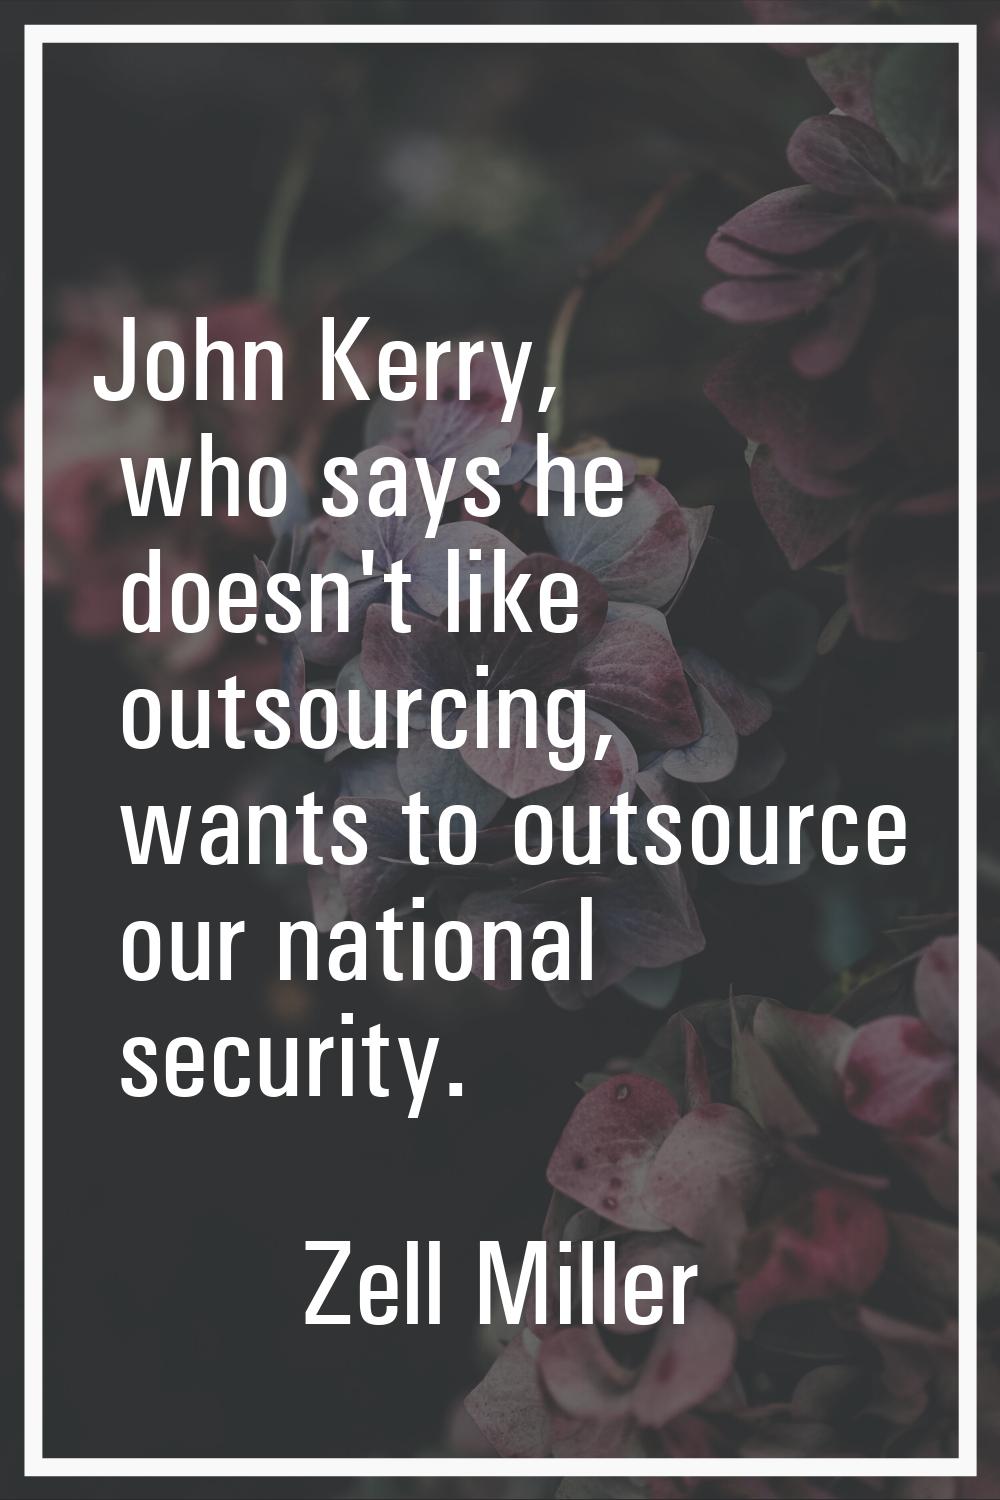 John Kerry, who says he doesn't like outsourcing, wants to outsource our national security.